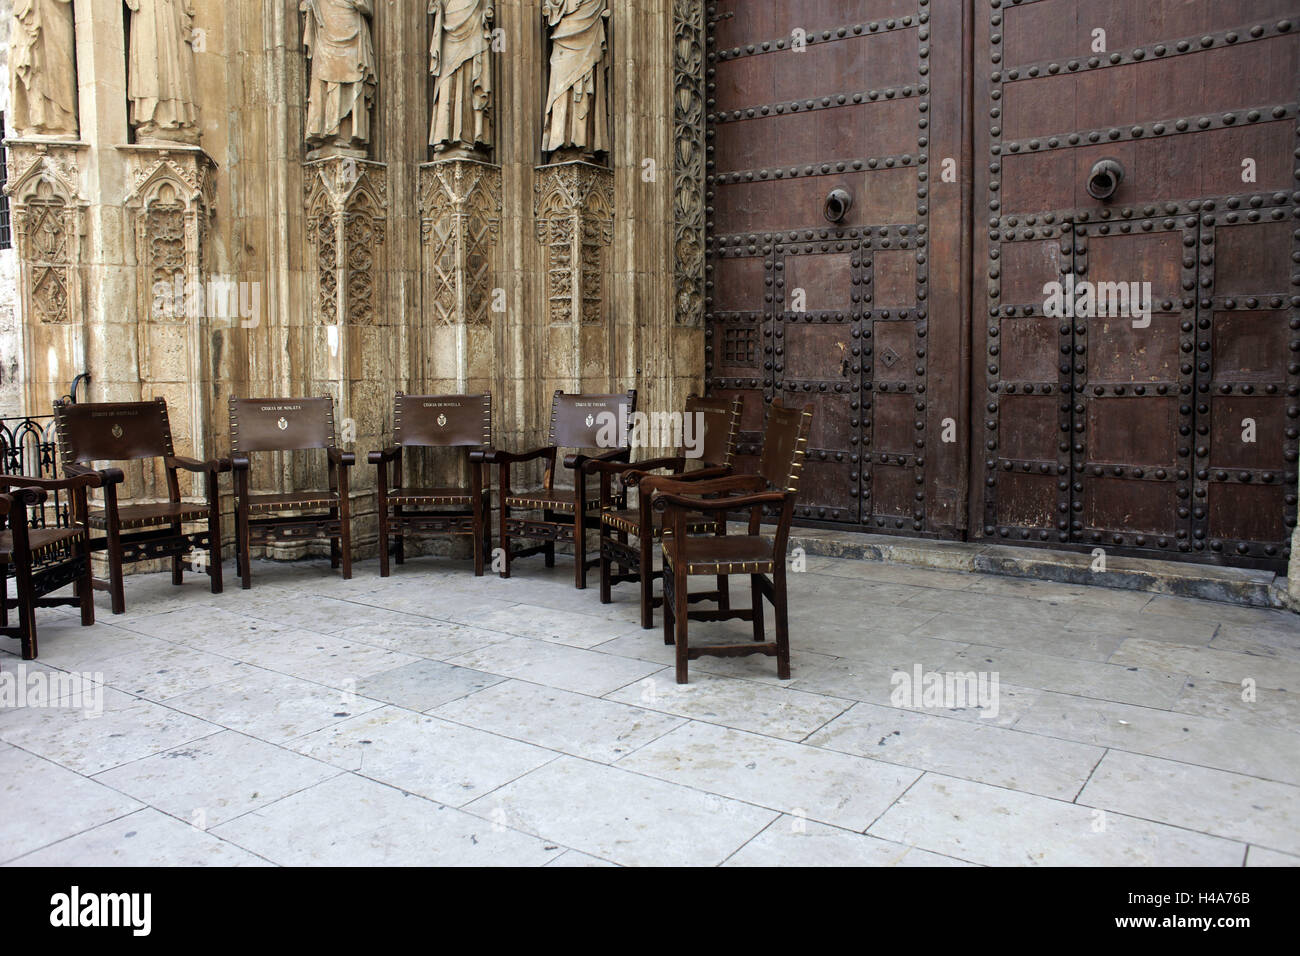 Spain, Valencia, cathedral, inside, no people, church, chairs, wooden chairs, door, closed, Stock Photo